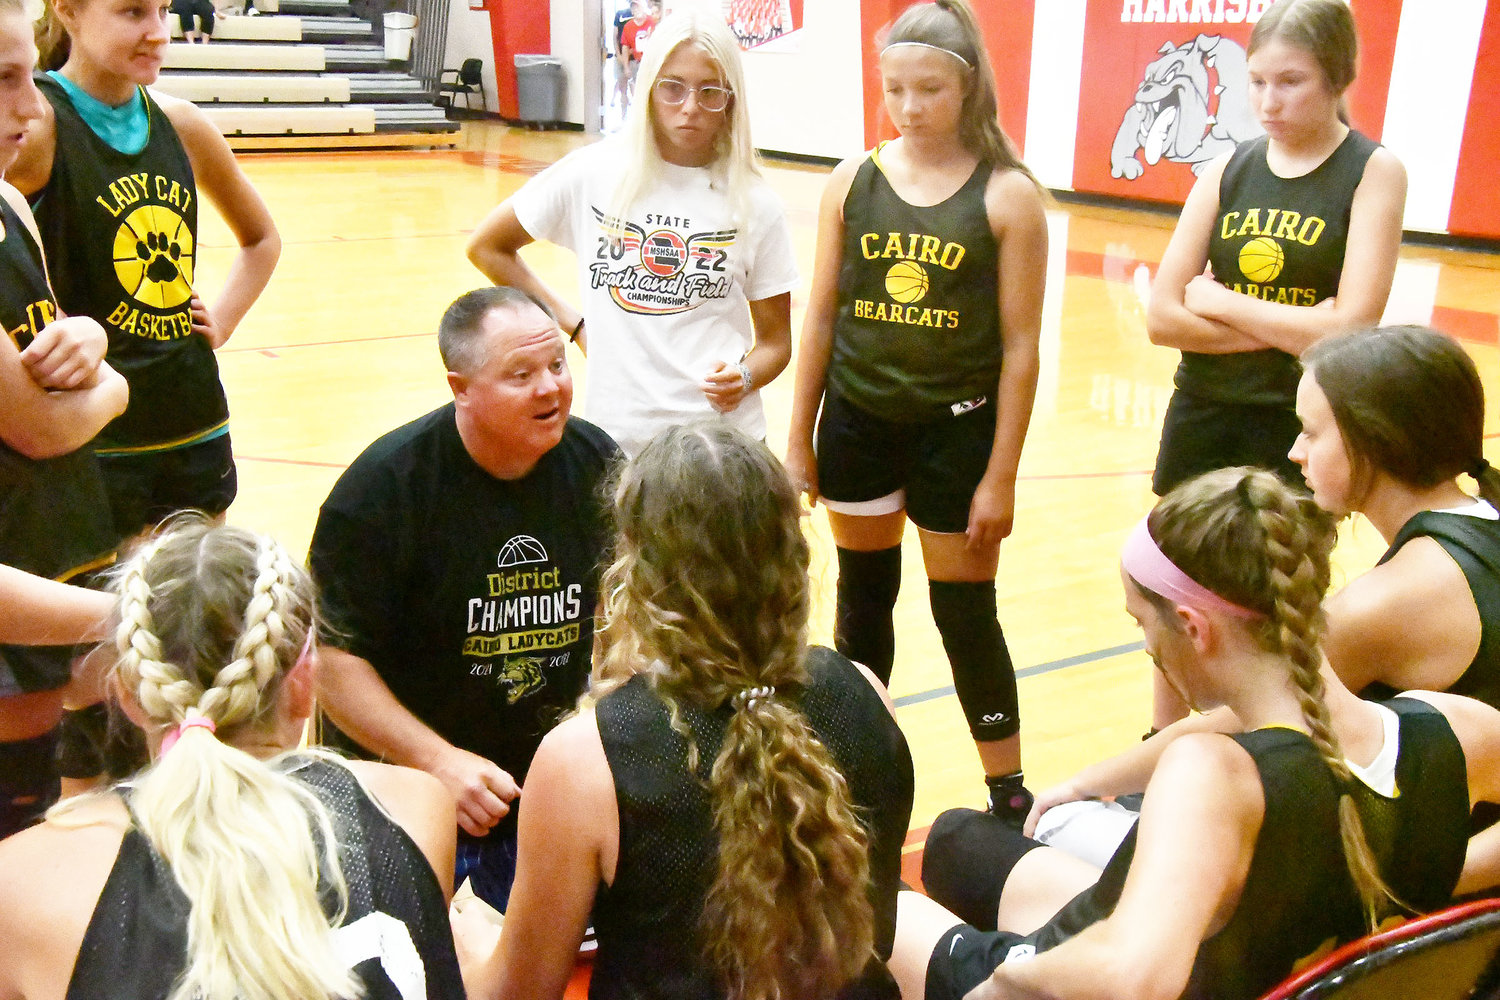 Cairo coach Brian Winkler talks to the team during a timeout. Looking on are Kennedy Kearns, Avery Brumley, Mallory Hankins and Melia Gittemeier.